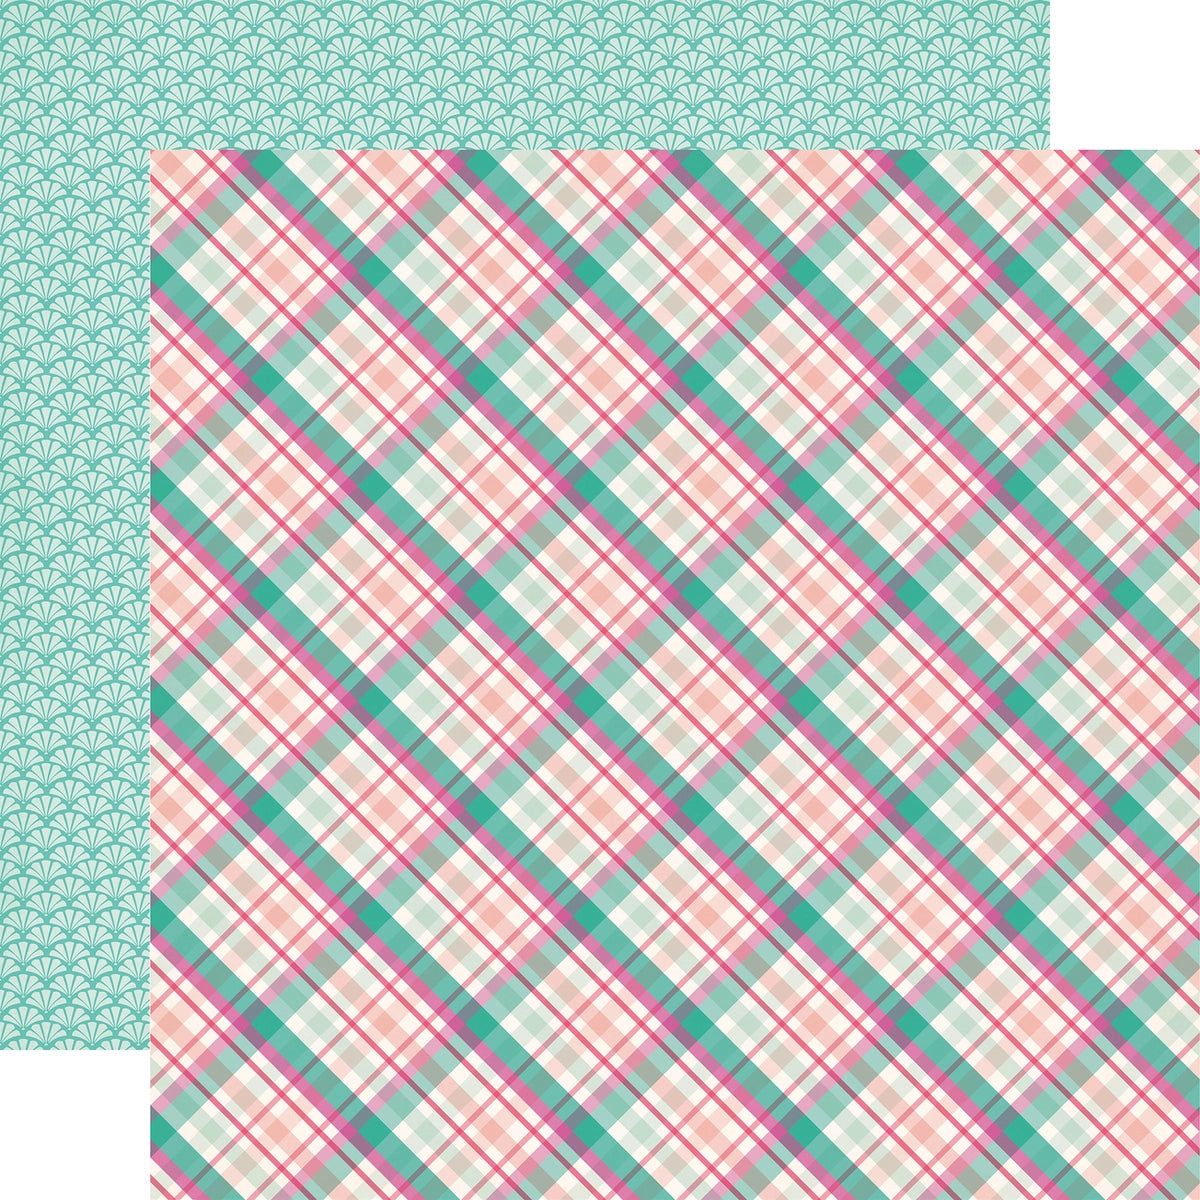 Multi-colored (Side A - pink and turquoise plaid on an off-white background; Side B - turquoise scallop abstract pattern)